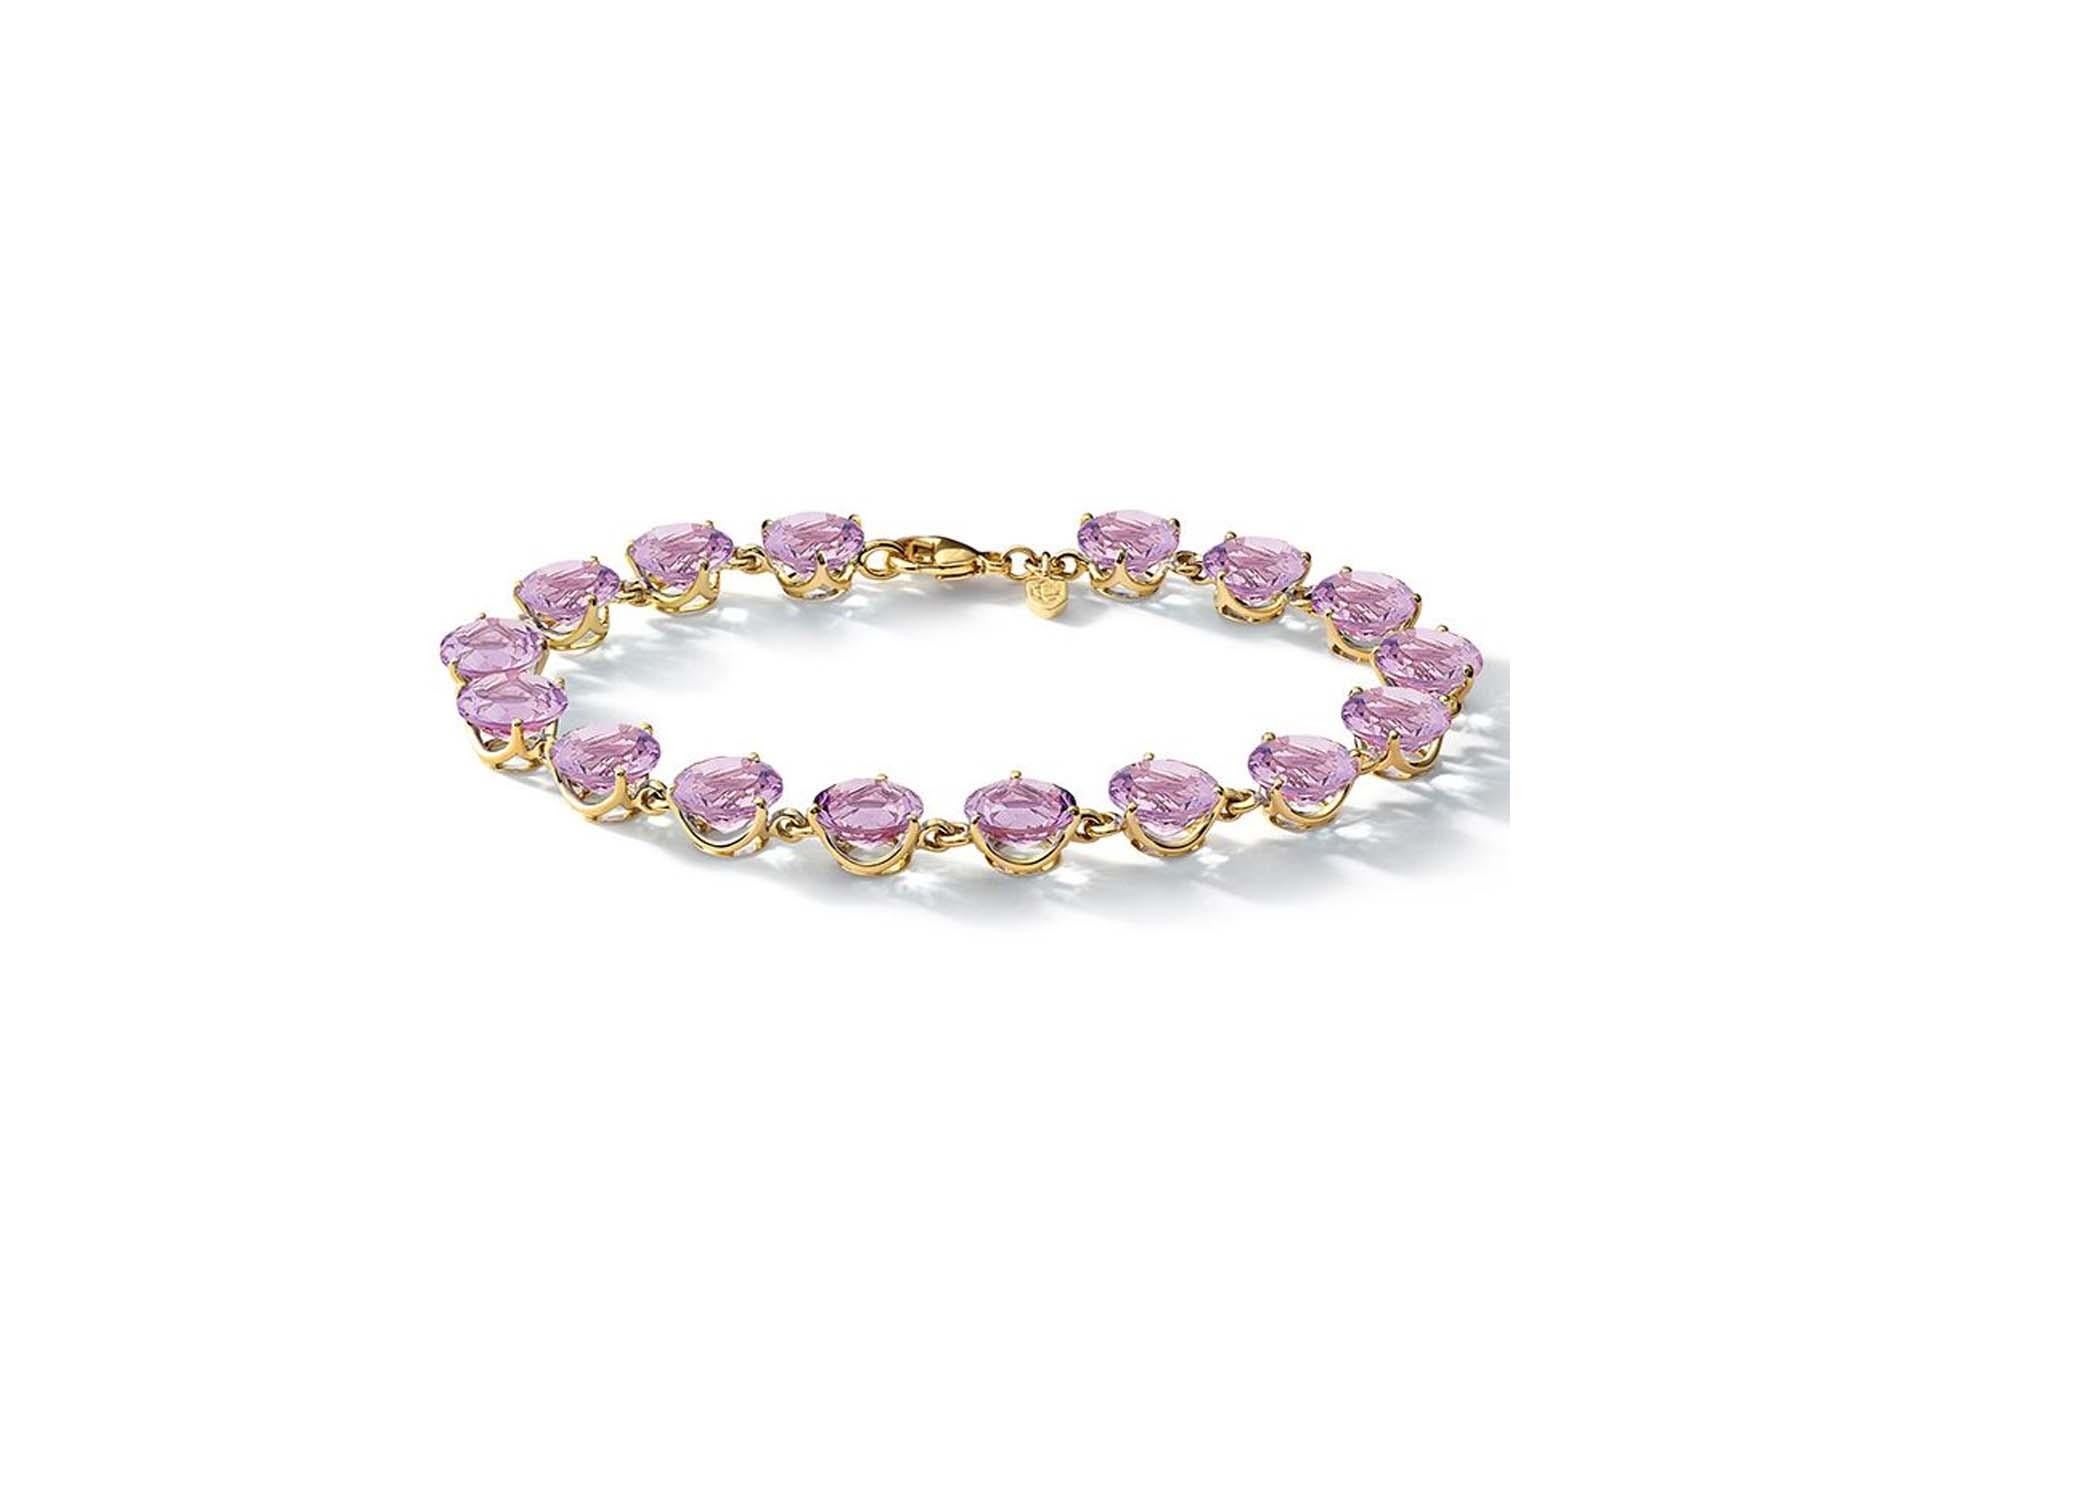 Riviere bracelet in 9 carat yellow gold with sixteen light purple amethyst, trigger clasp and logo tag. Inspired by the classic Riviere style necklace typical of the Georgian Era ( 1714-1837). From the Journey to Scandinavia.

This bracelet measures